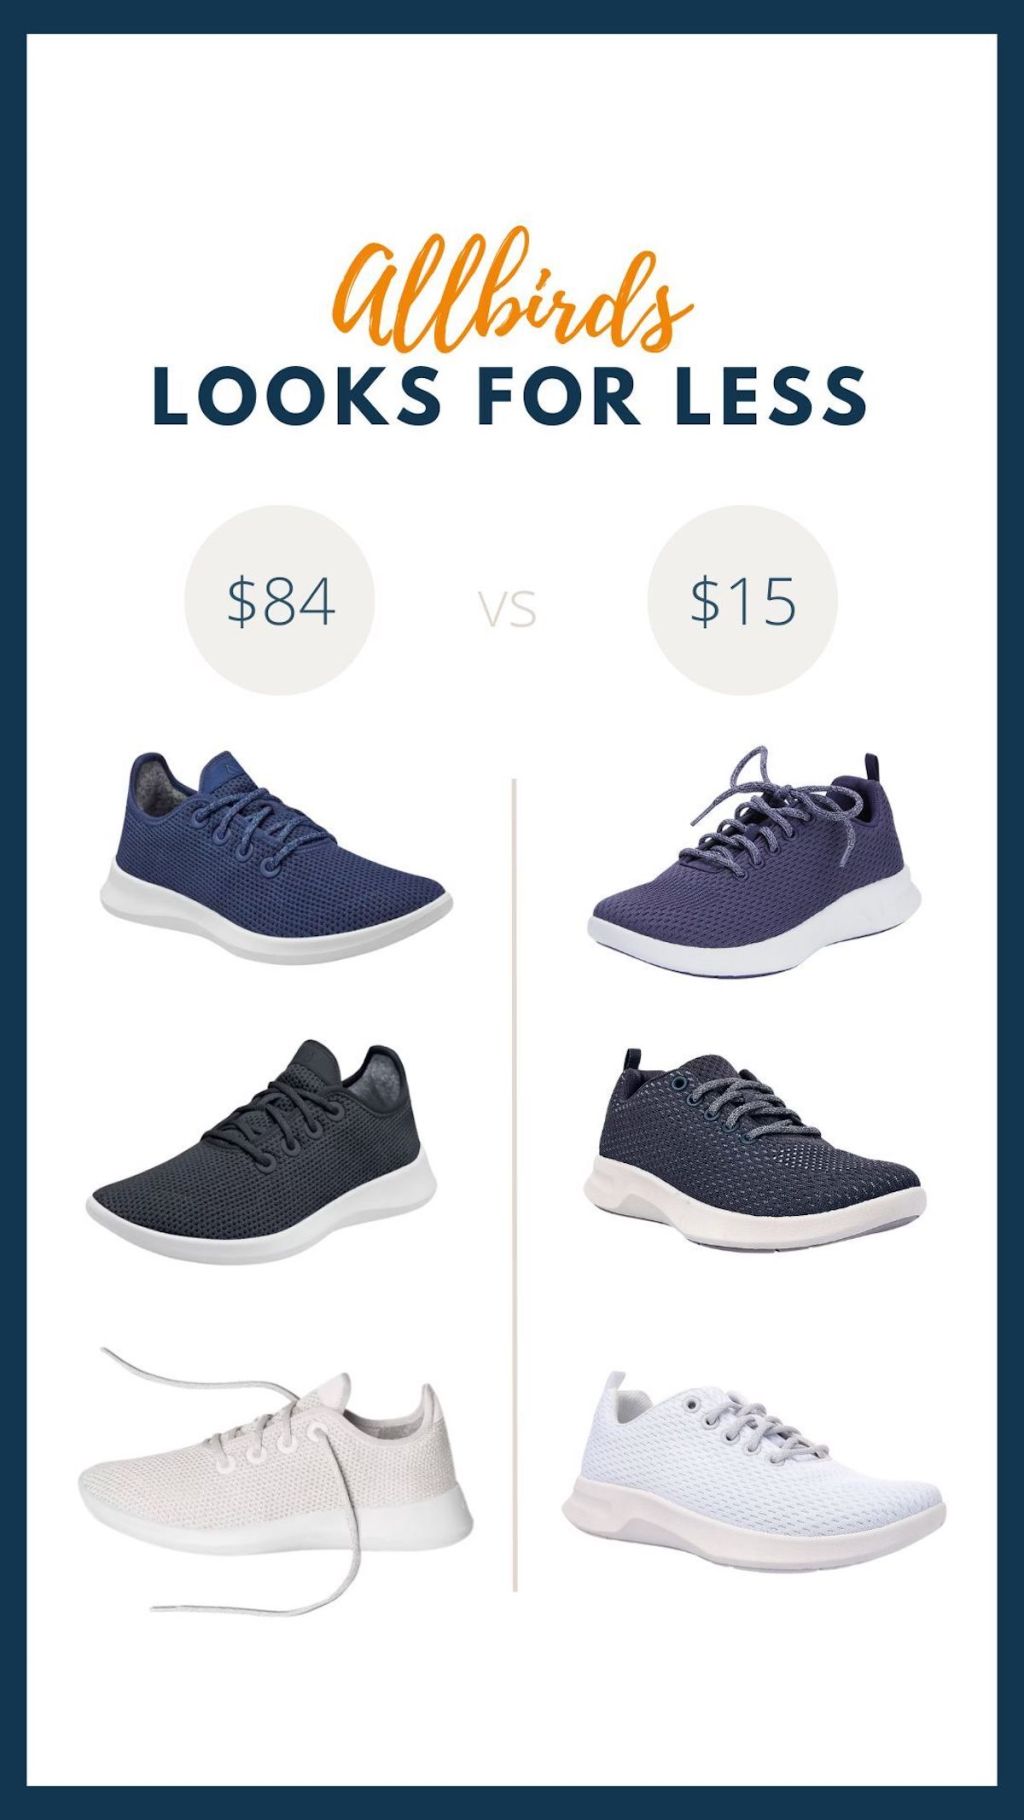 allbirds looks for less graphic with three different pairs of shoes and price comparison